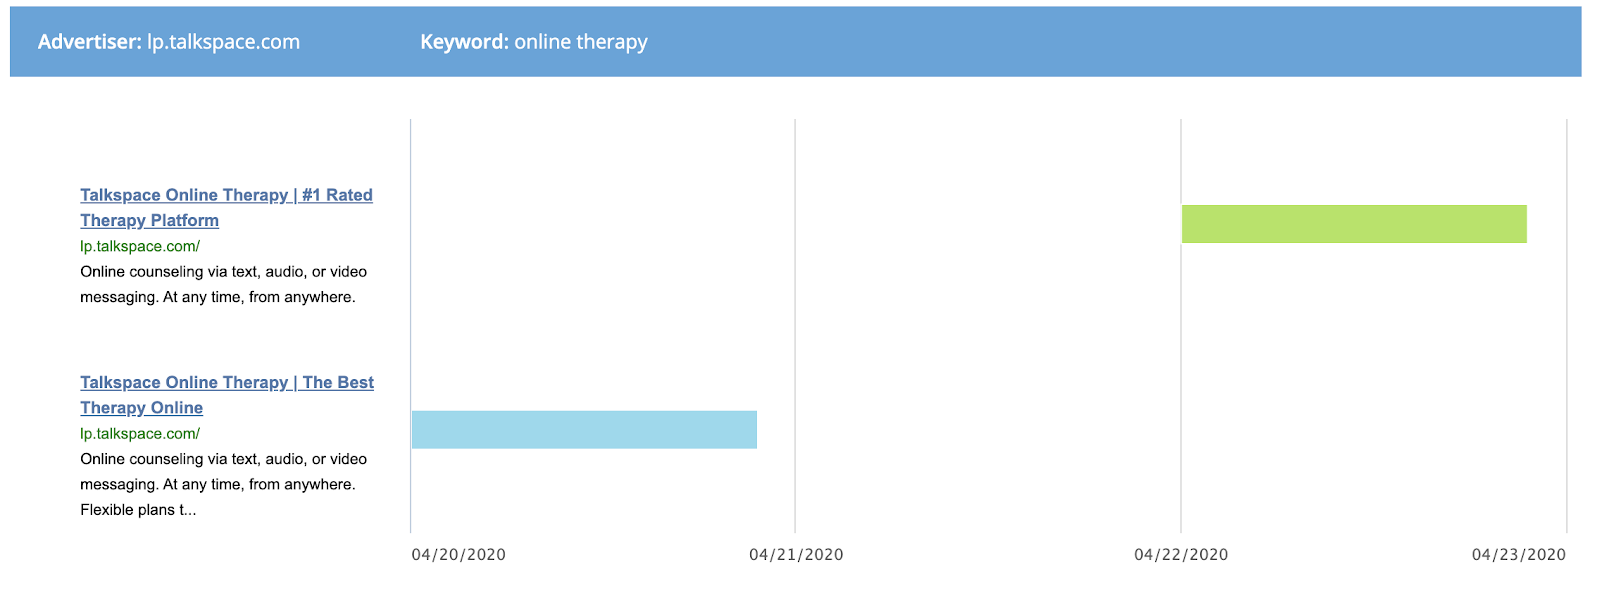 iSpionage: keyword 'online therapy'